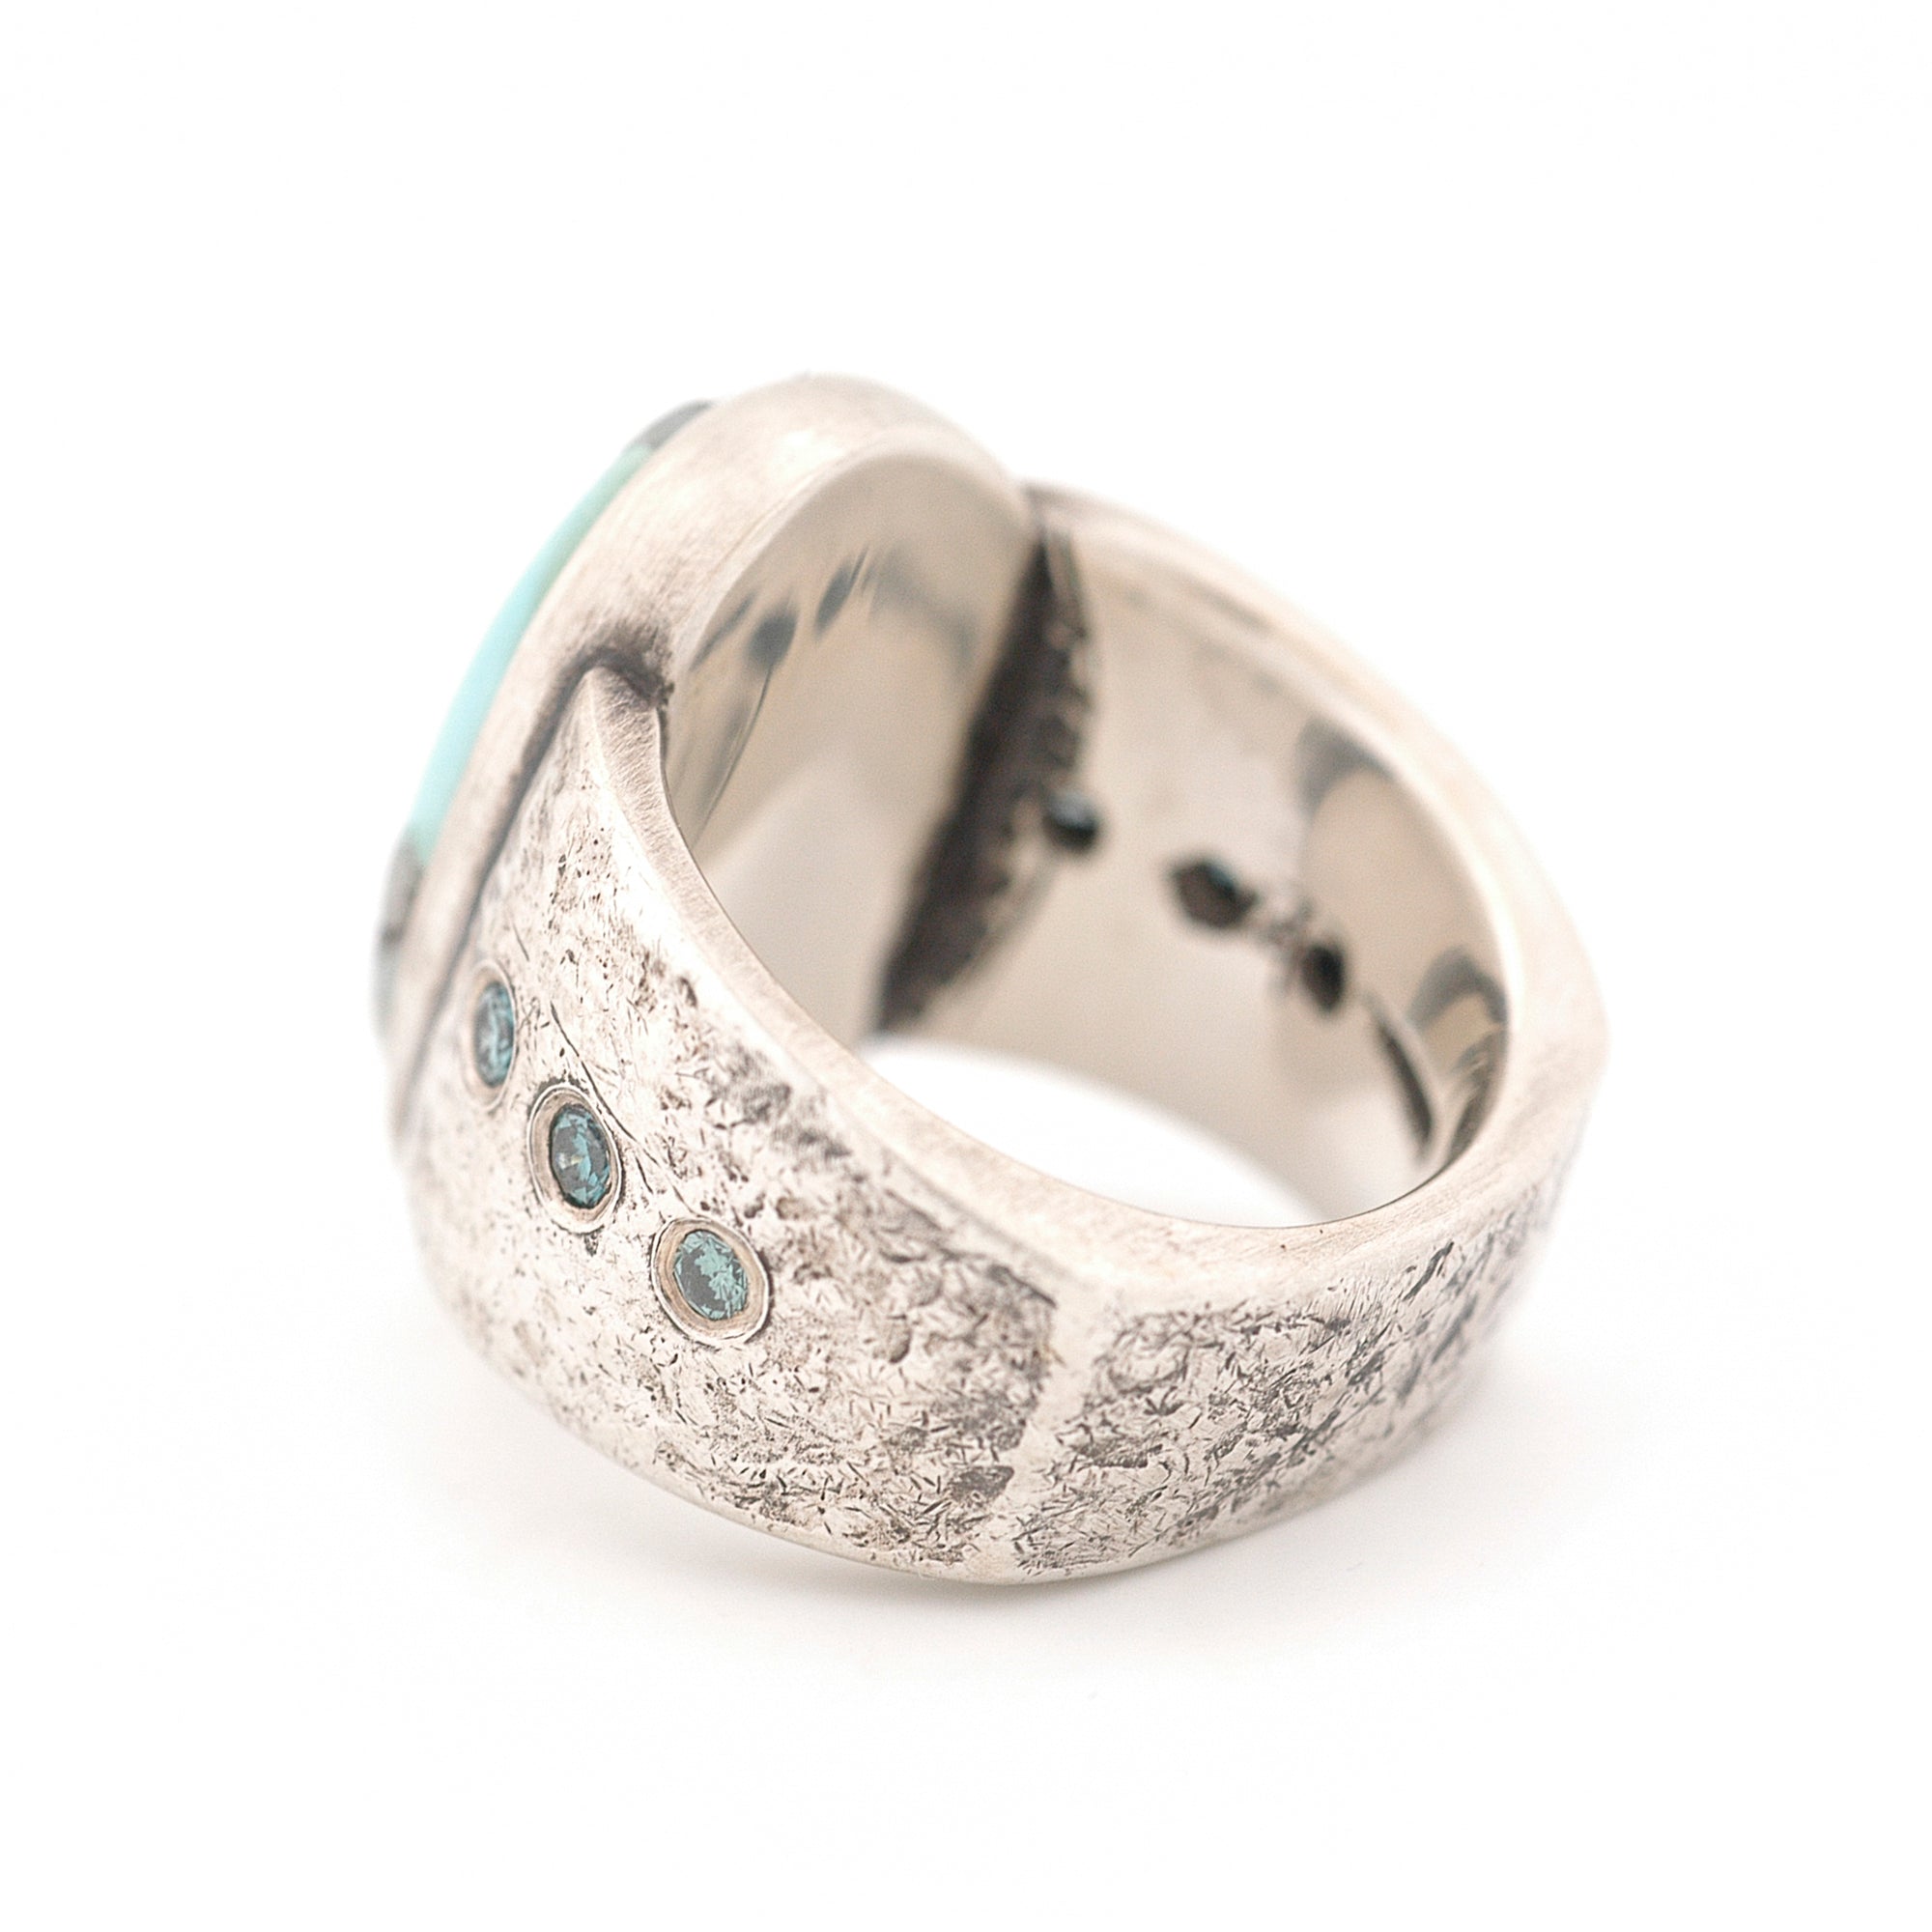 Sterling Silver, Turquoise and Blue Diamond Ring